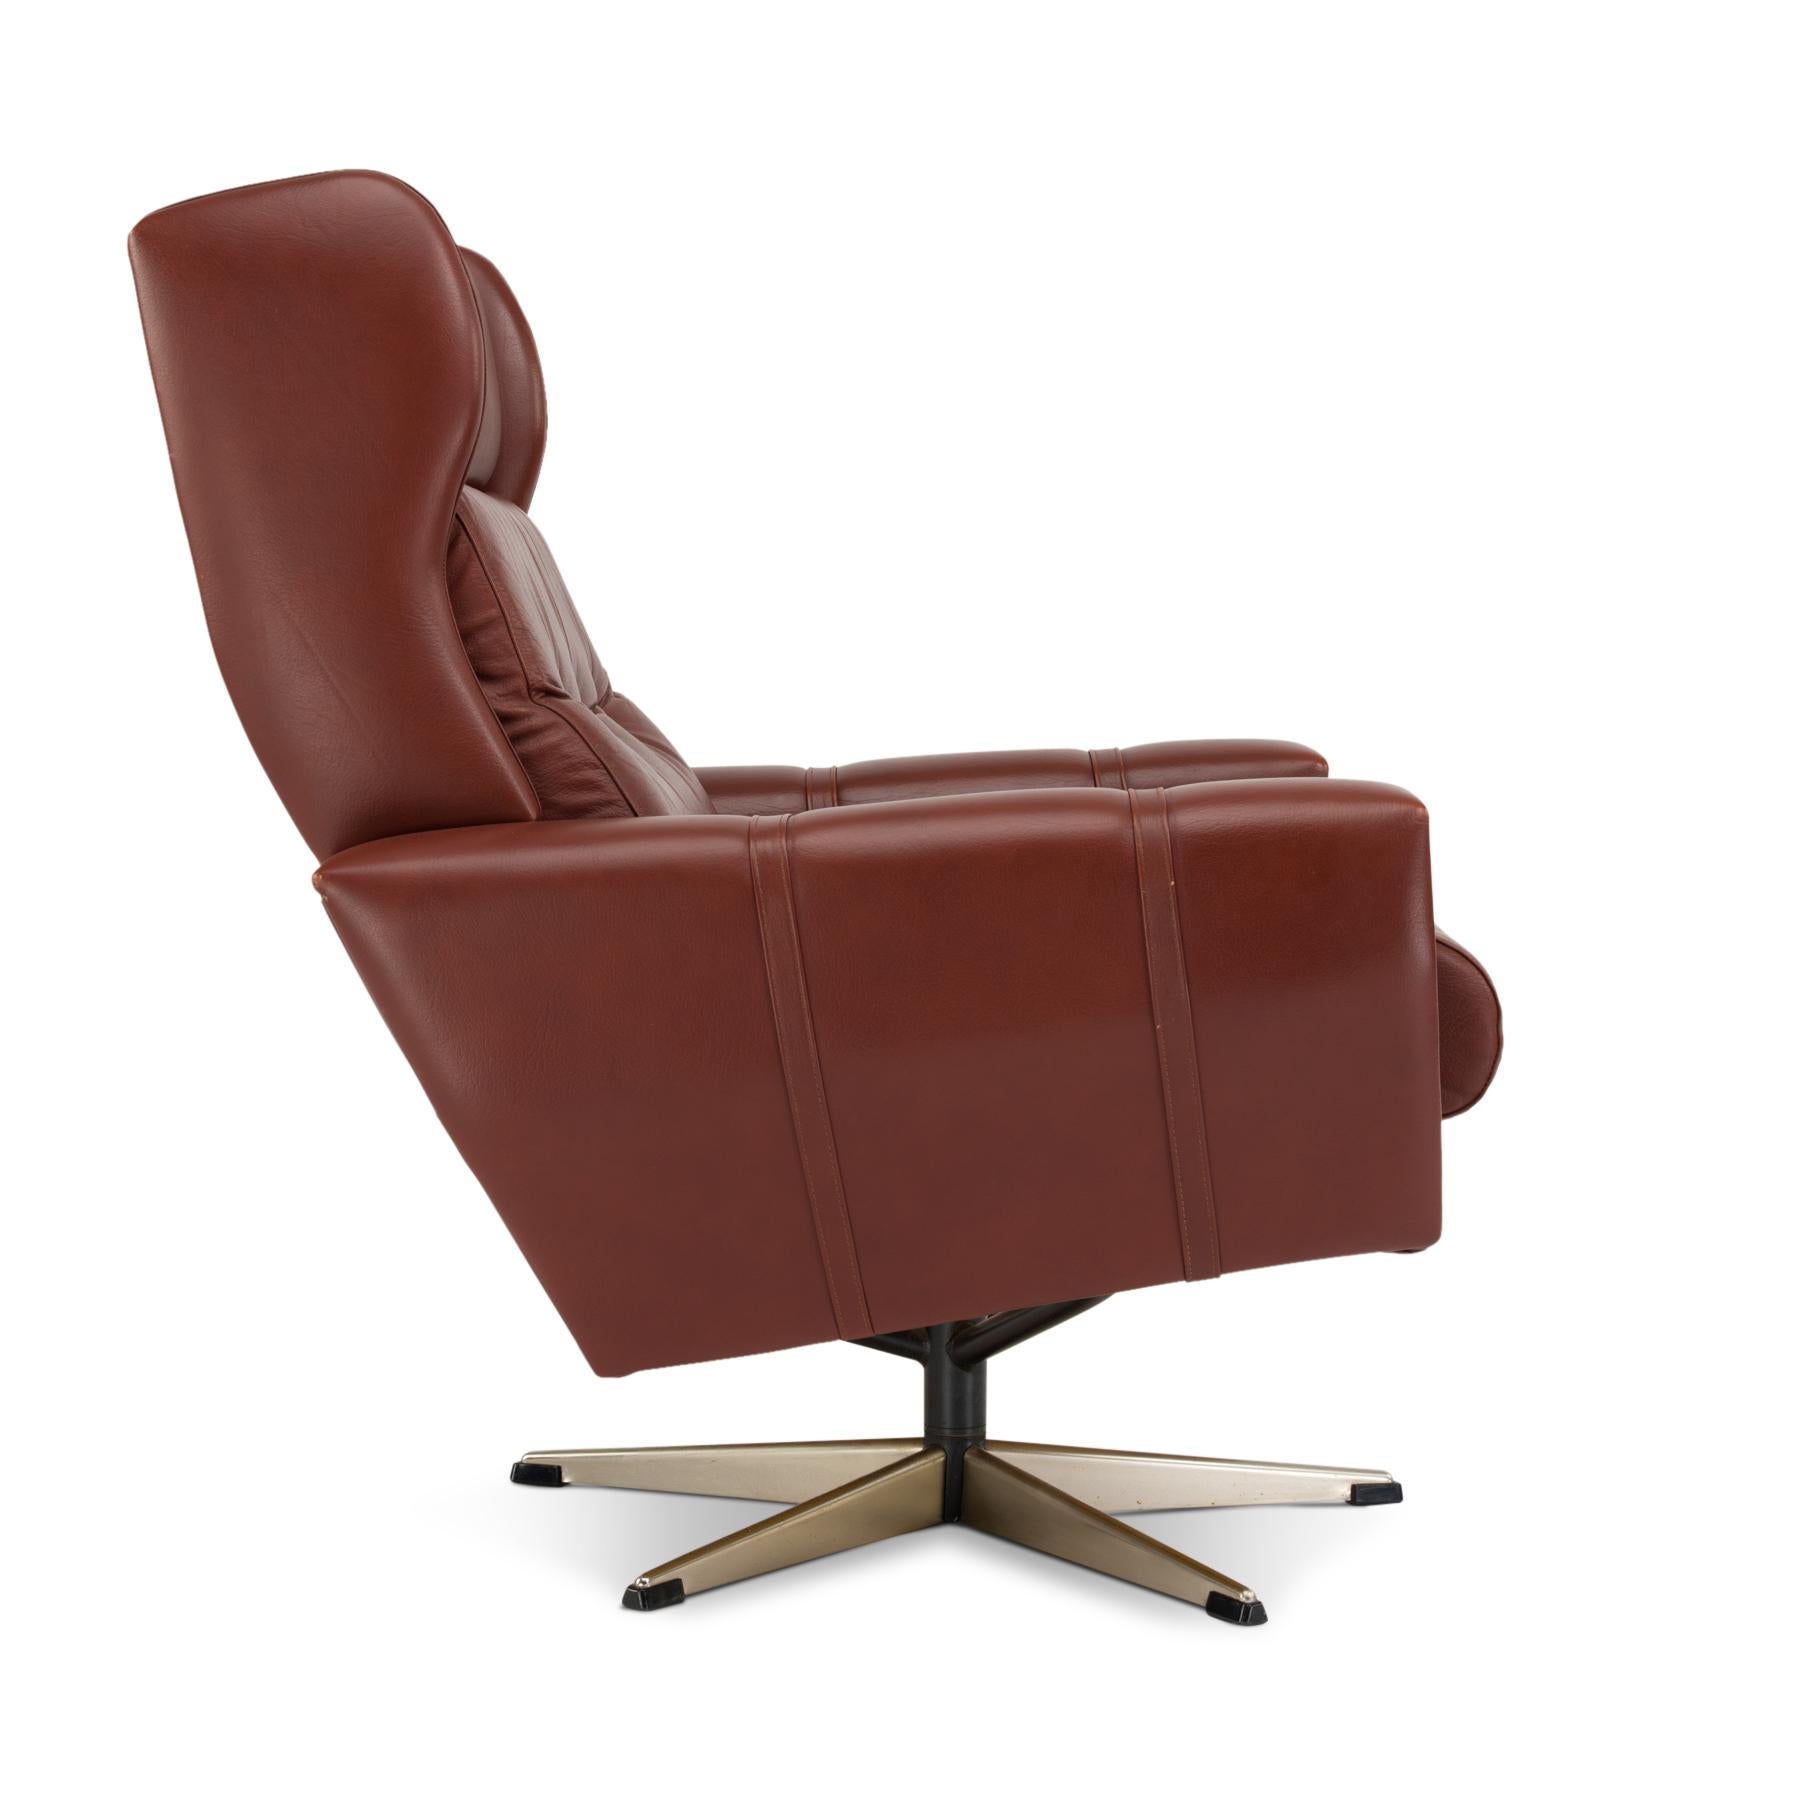 This brown leather swivel chair is made under brand name Lystolet by furniture factory Lystager Industri in Hornslet Denmark in the early 1970s. The chair has a cool look to it probably due to the straight up shaping and reddish brown buttoned